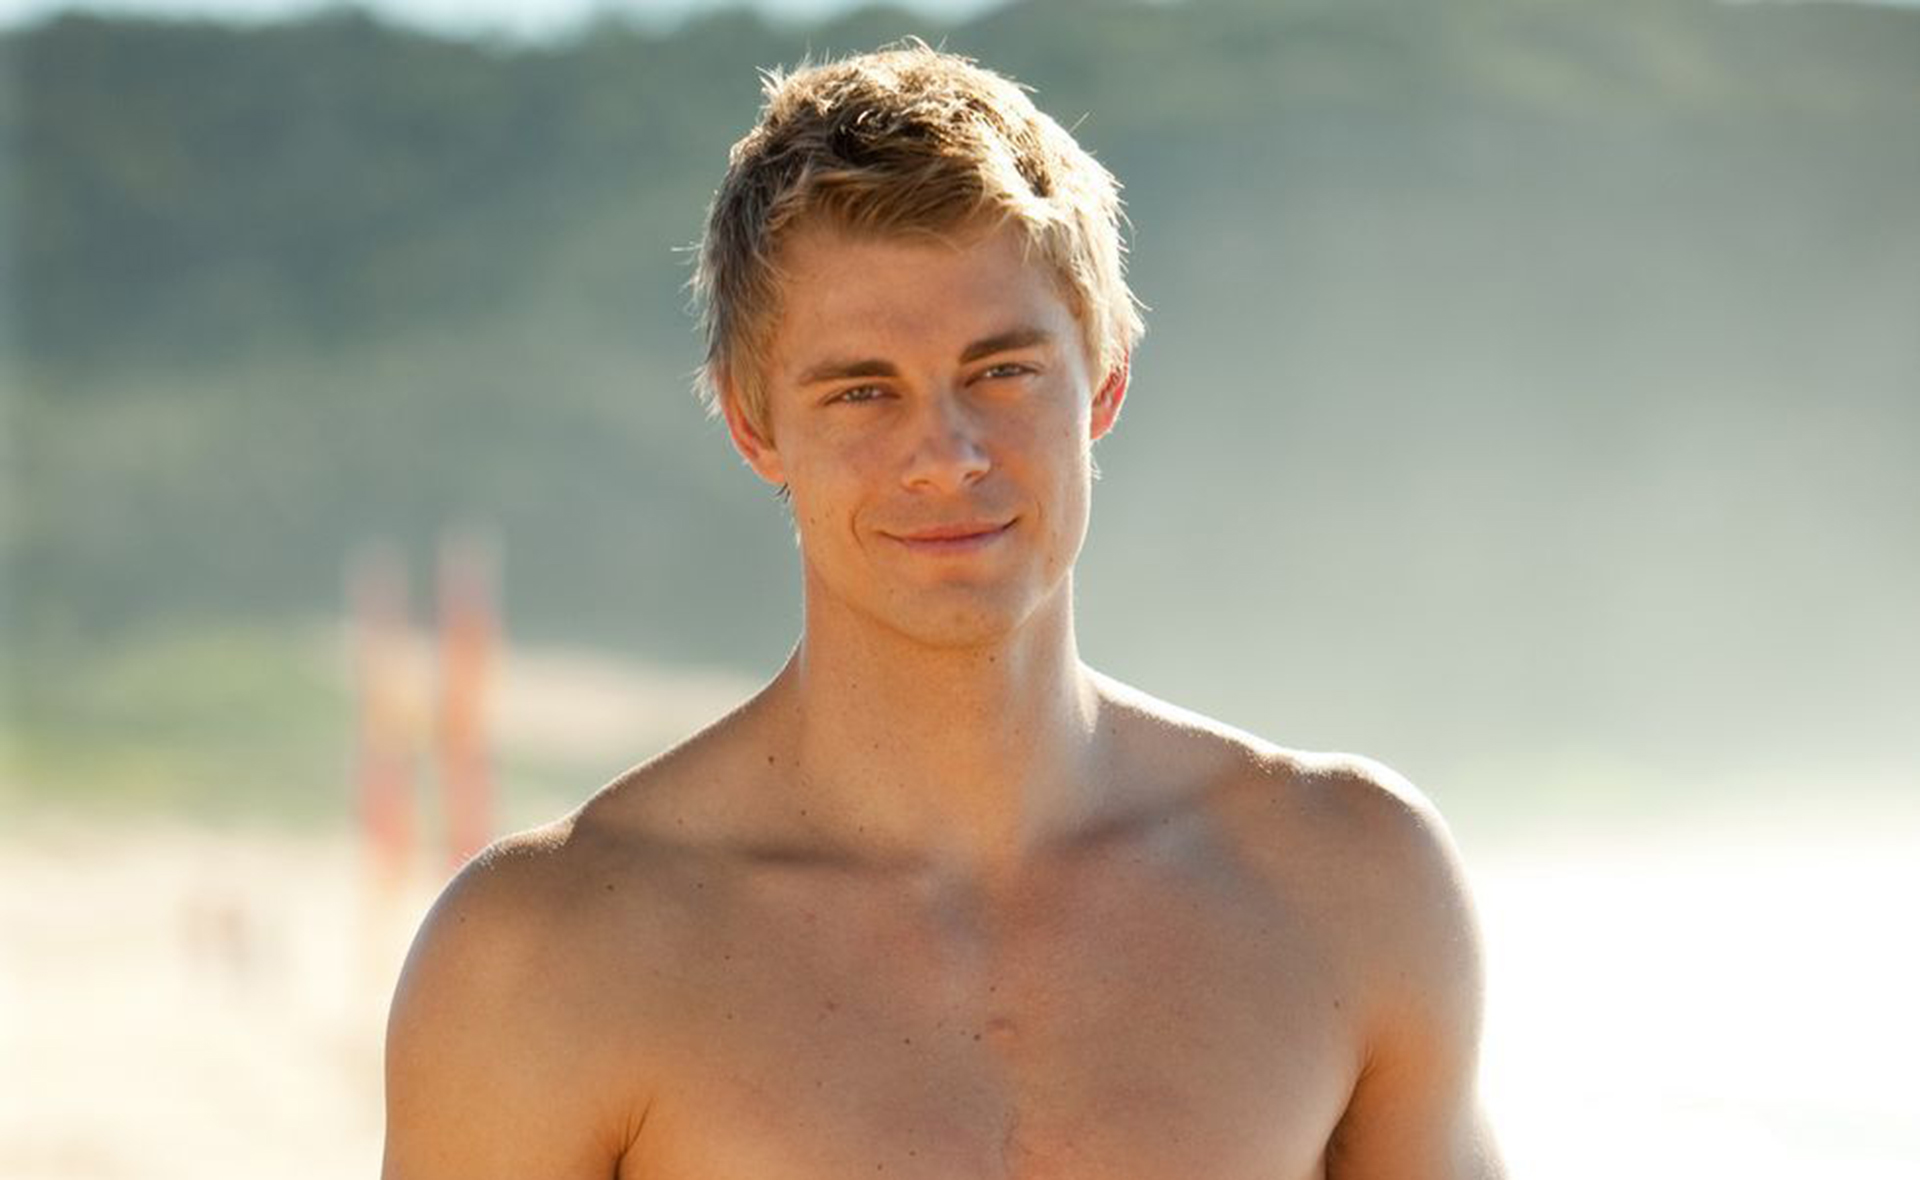 Home and Away alum Luke Mitchell looks unrecognisable in his latest role